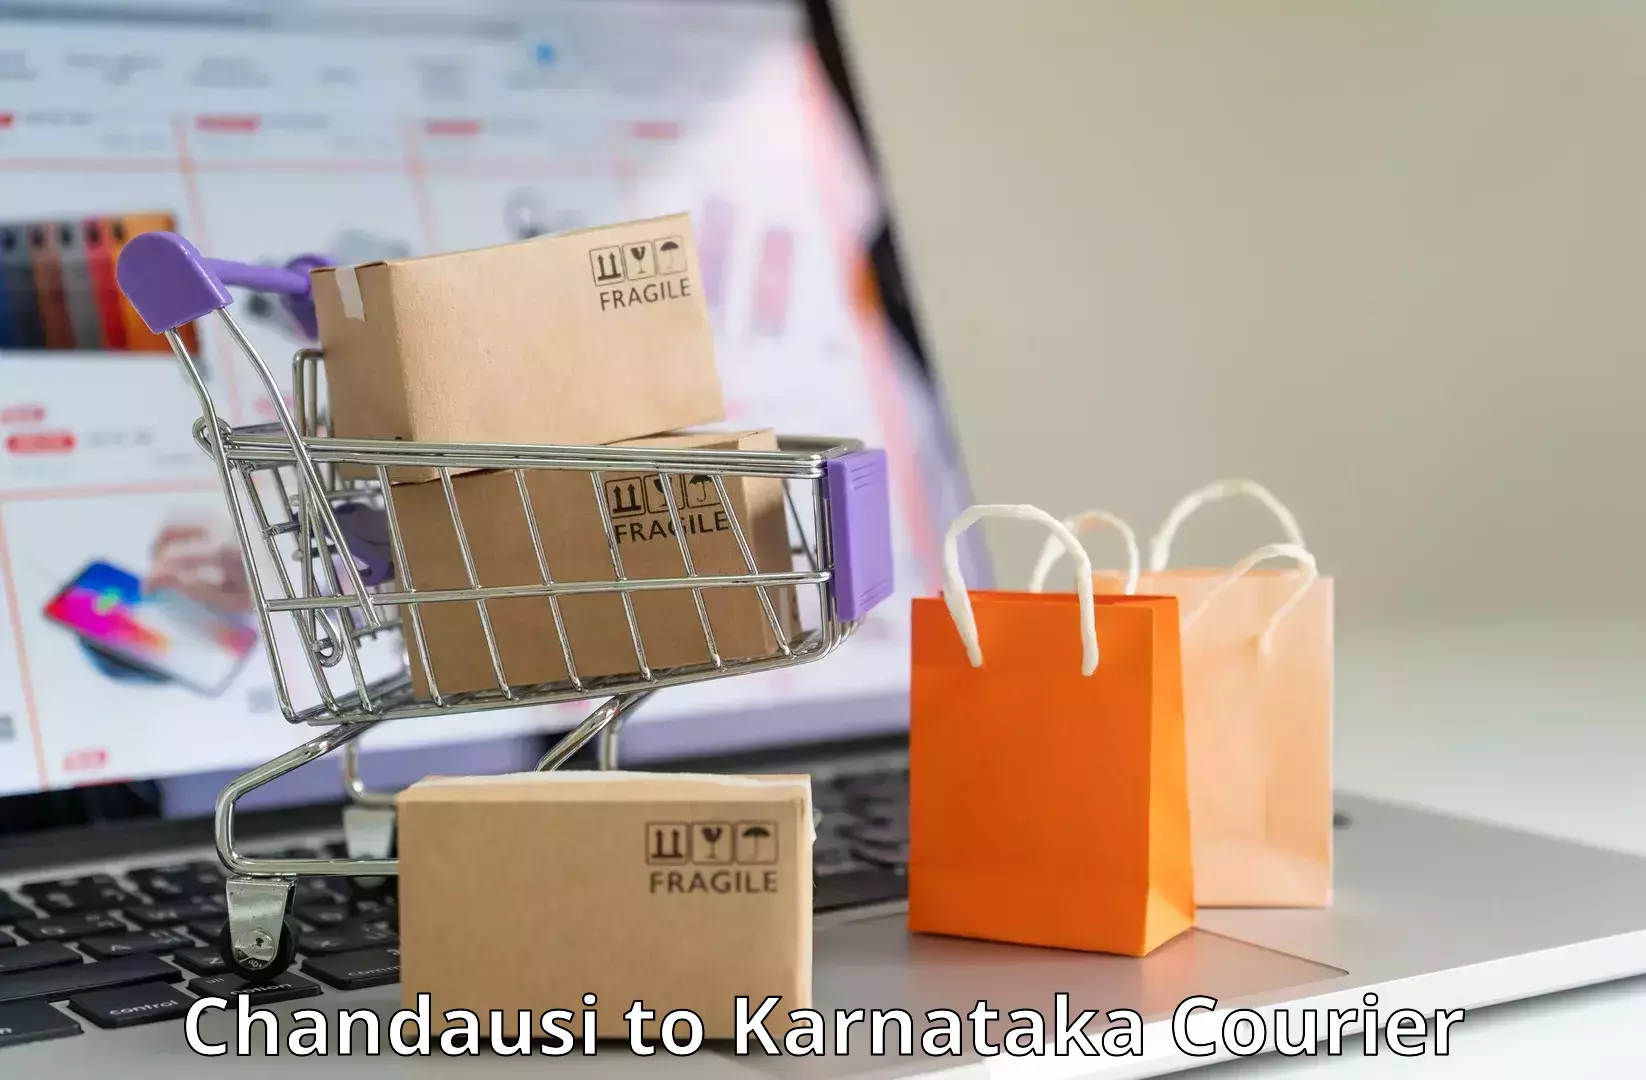 Package delivery network Chandausi to Byadagi